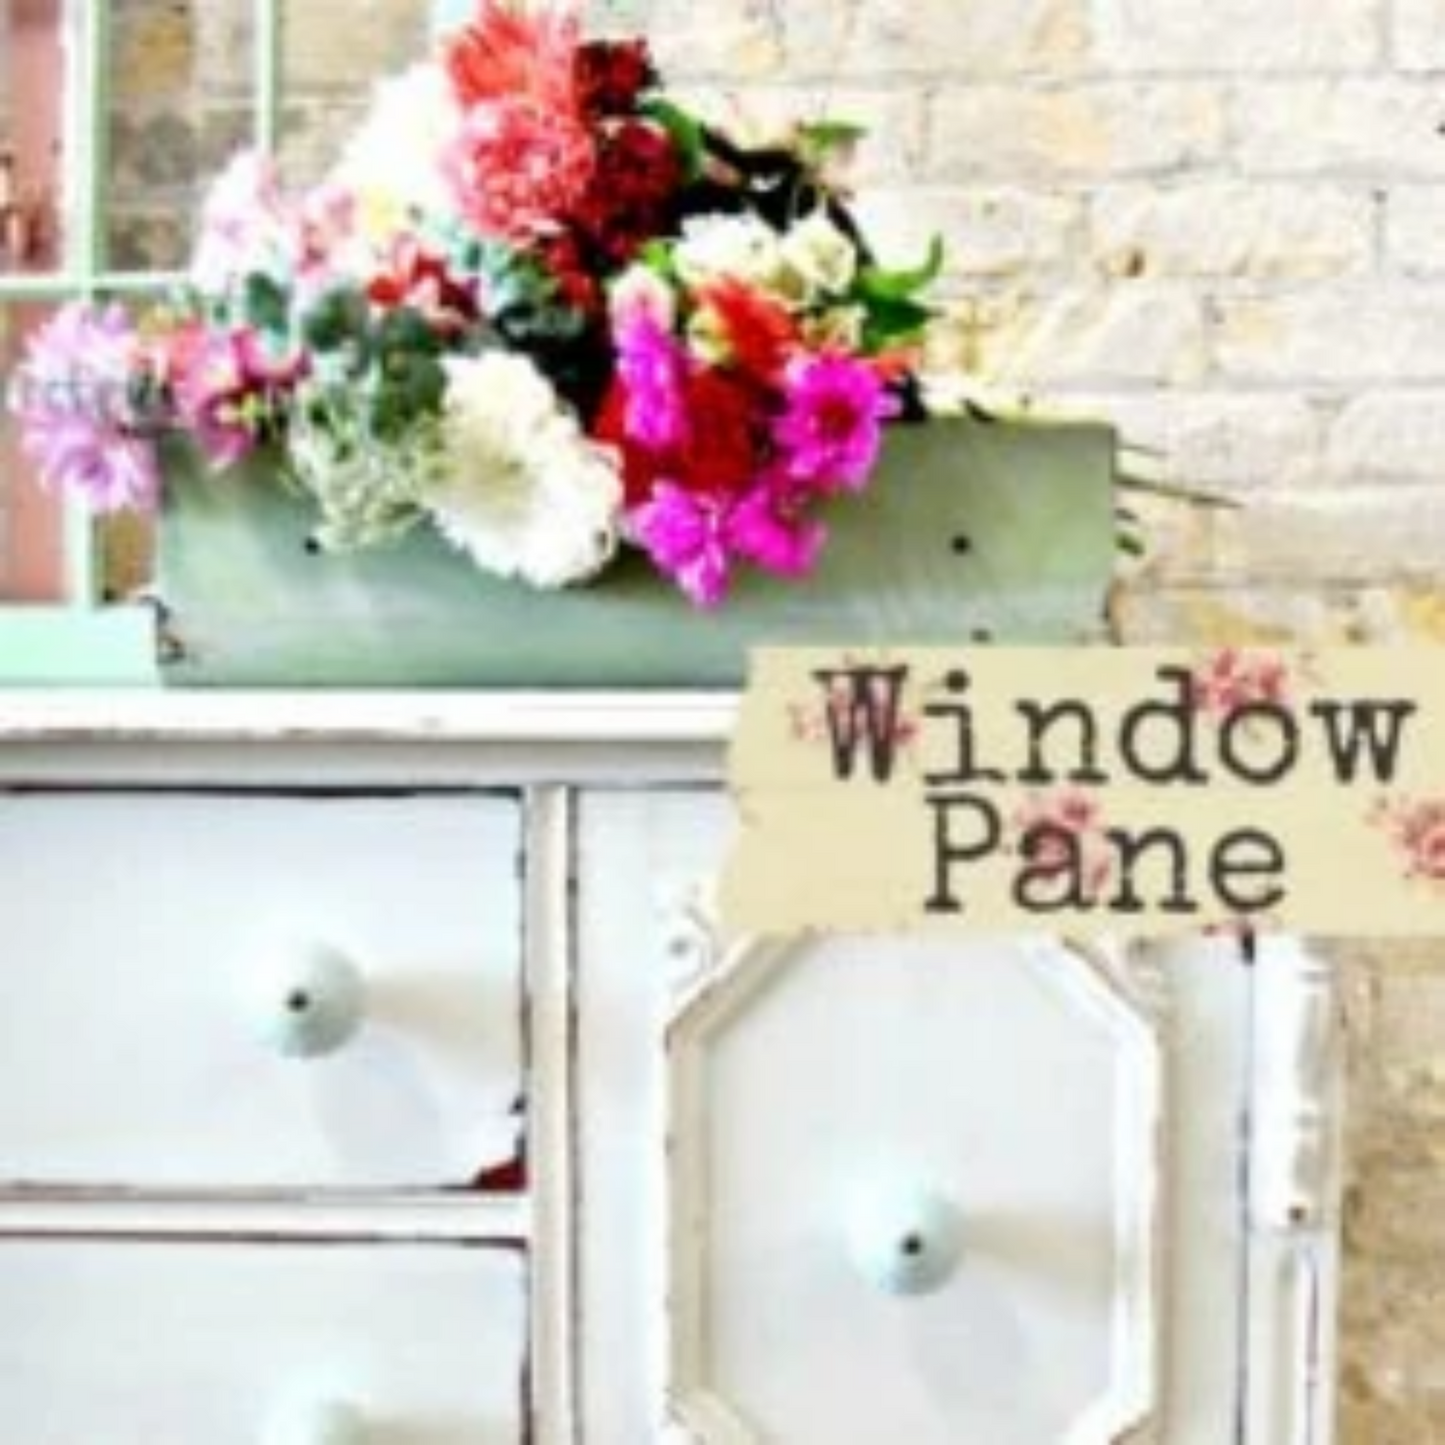 Credenza painted in Window Pane (off white) by Sweet Pickins Milk Paint available at Milton's Daughter